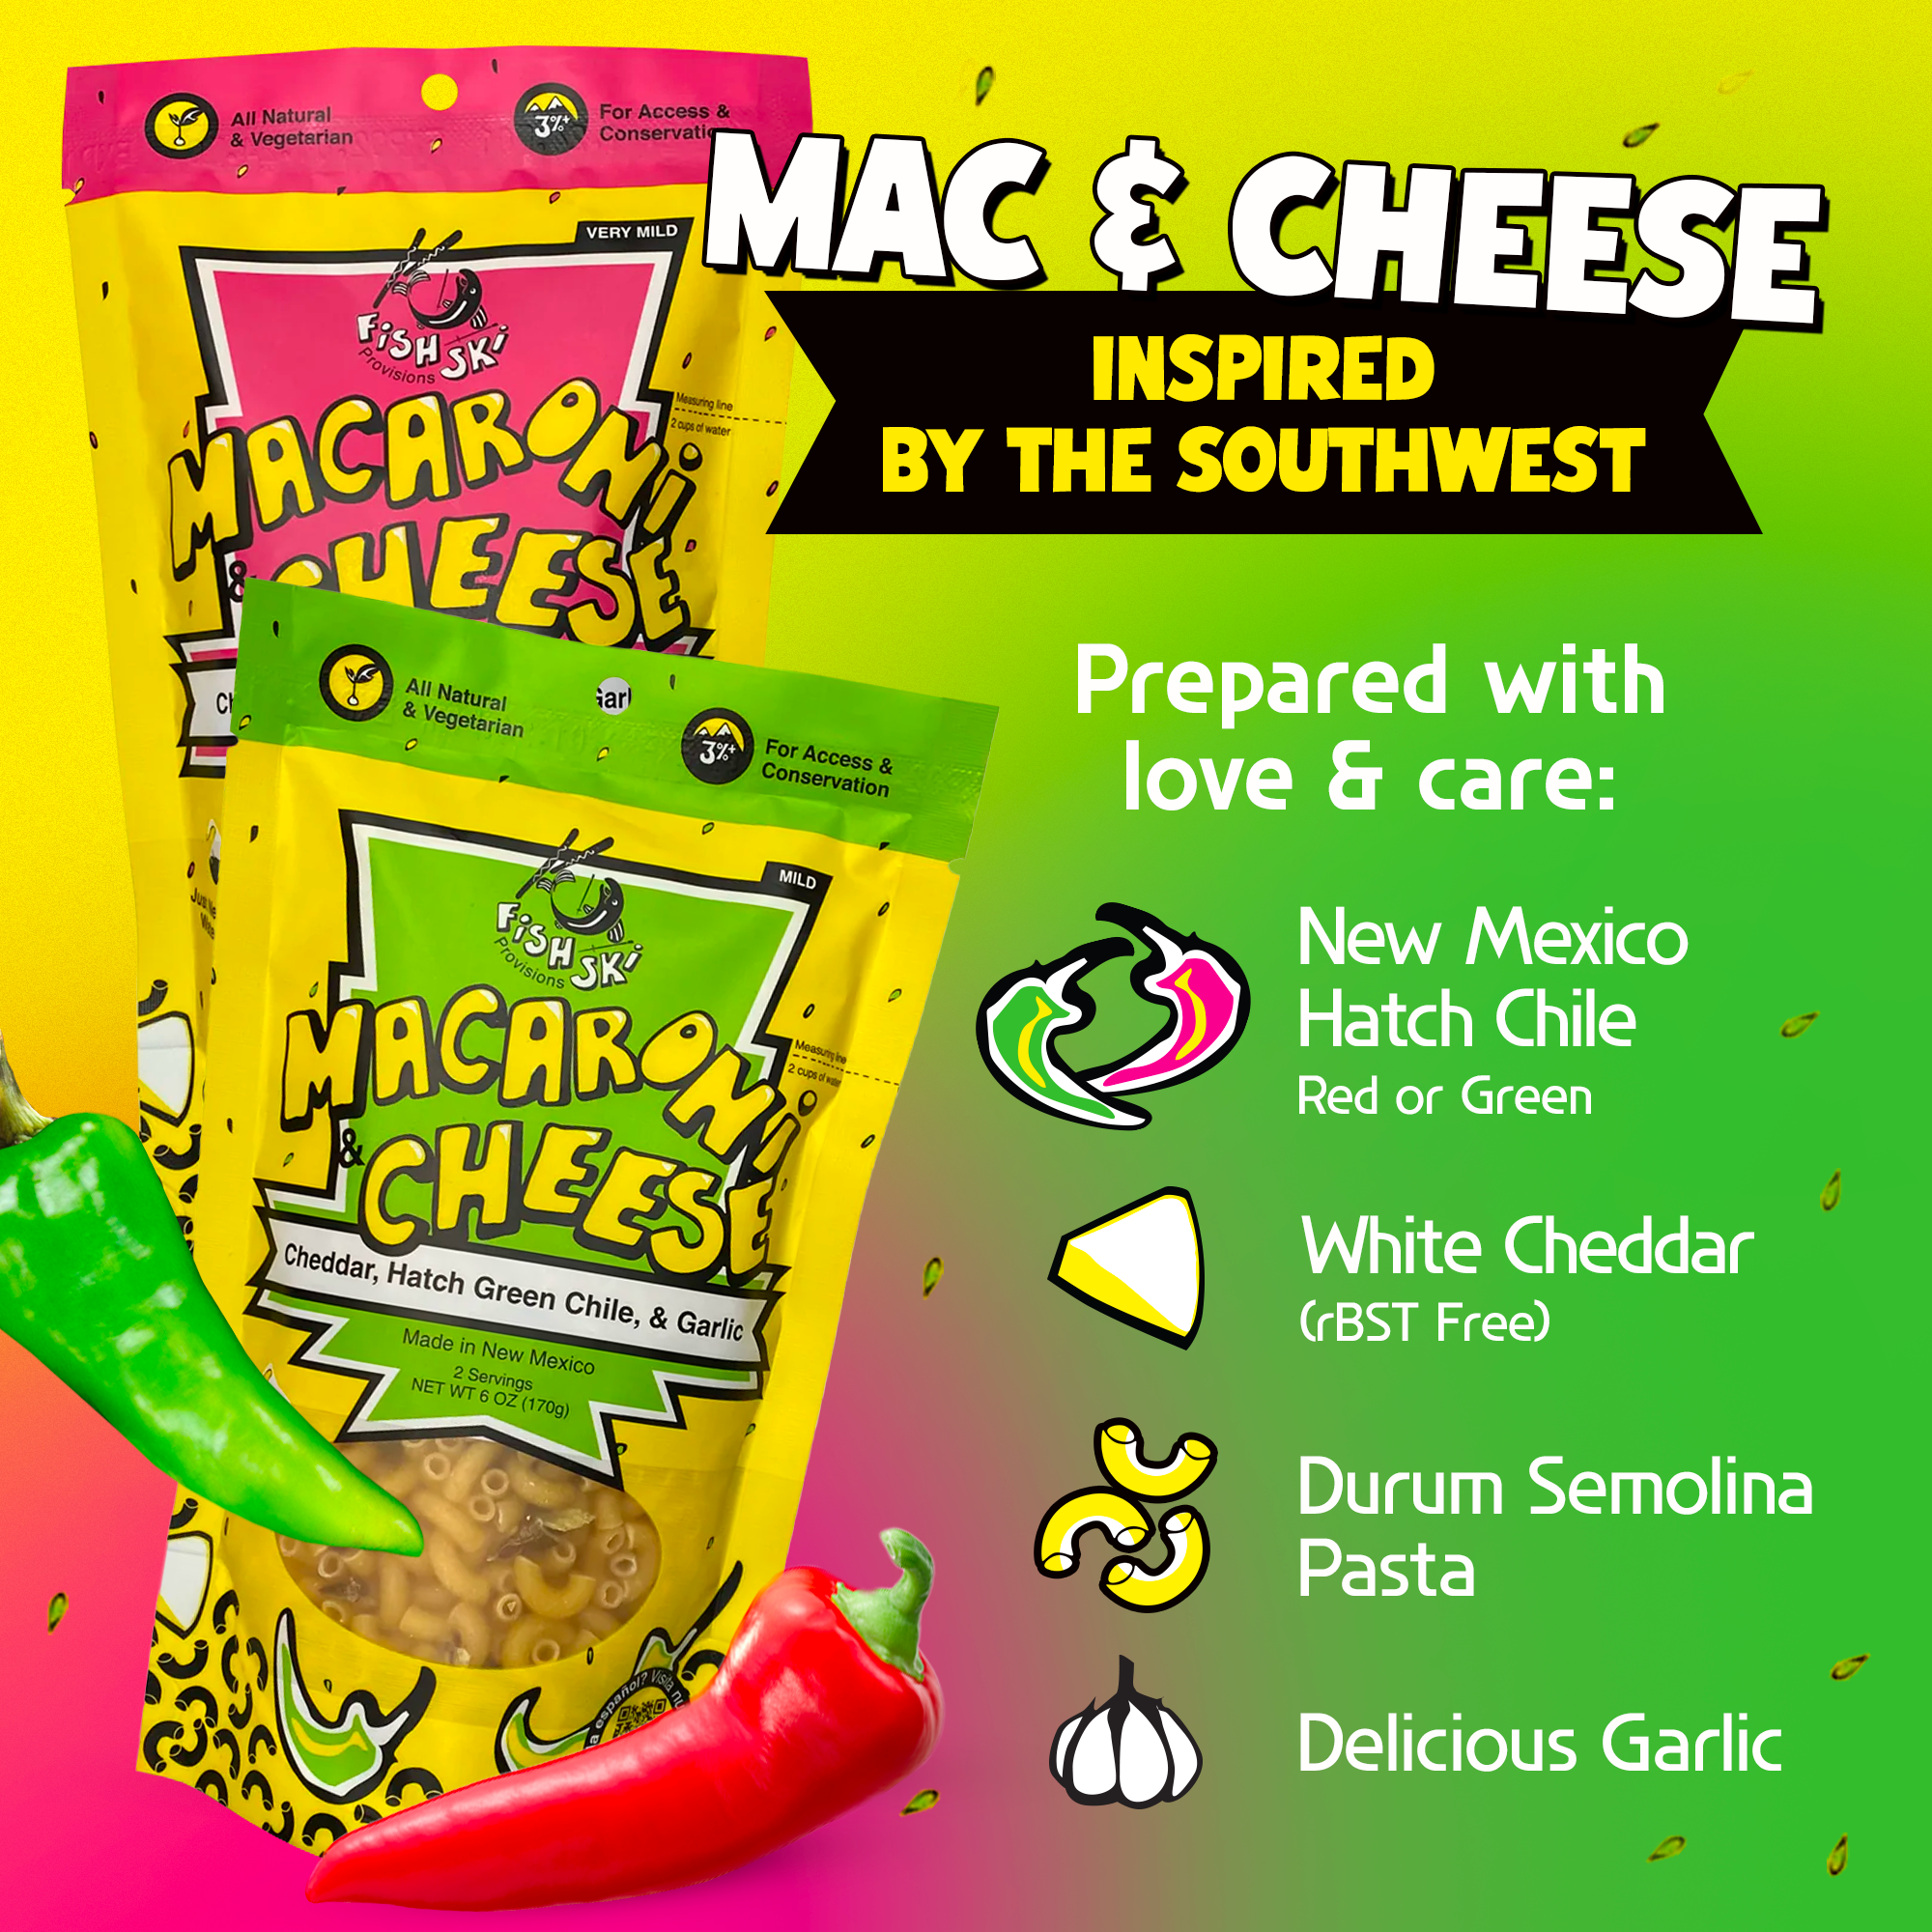 Macaroni and Cheese with Hatch Red and Green Chile + Cheddar Cheese + Garlic, Variety Pack, by FishSki Provisions, 6 oz bags, 12 pack - image 3 of 5